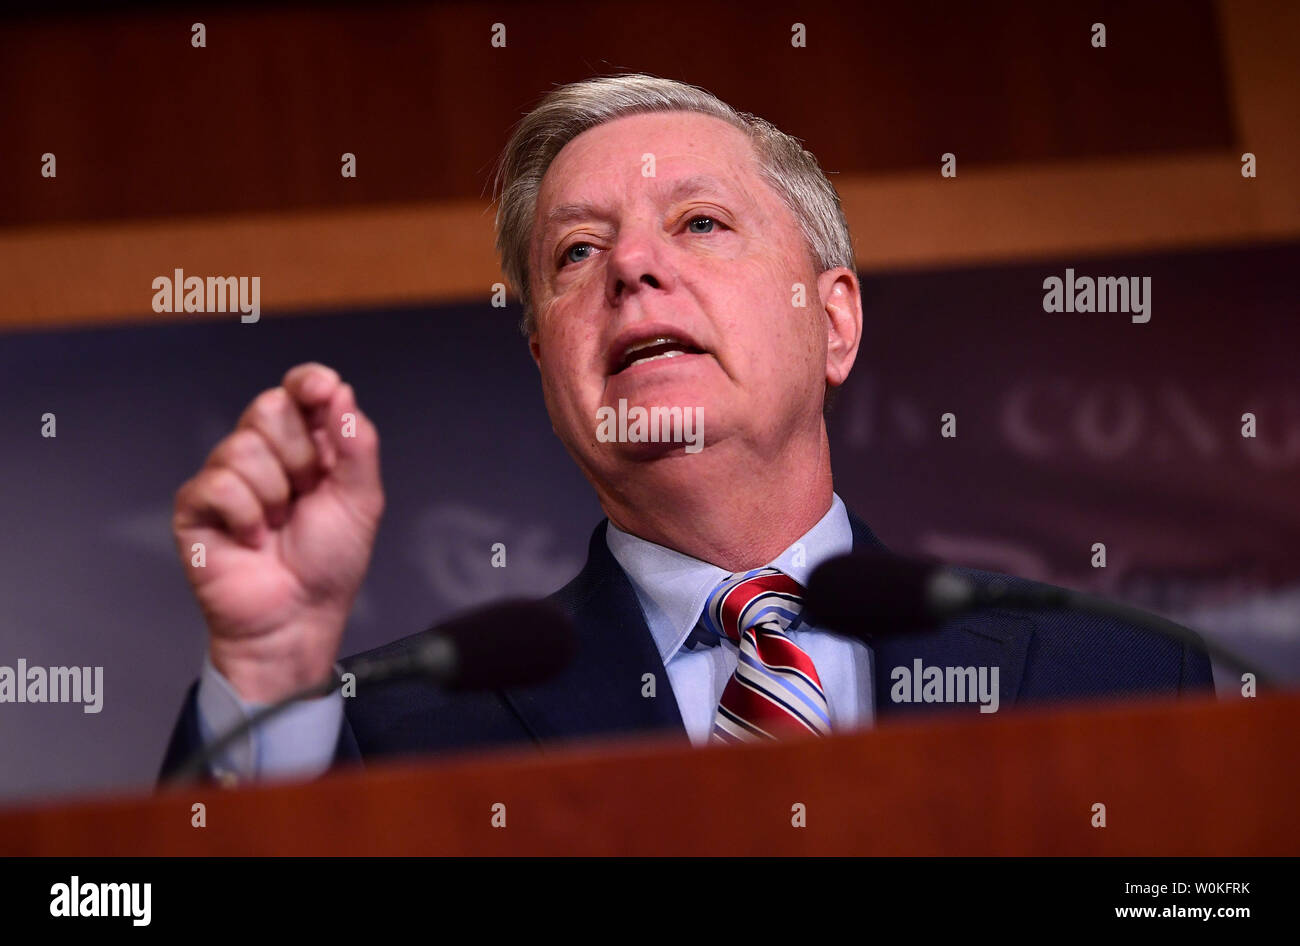 Sen. Lindsey Graham, R-S.C., speaks to the media on Special Counsel Robert Mueller's report into potential collusion between the Trump campaign and Russia, on Capitol Hill in Washington, D.C. on March 25 2019. The Muller Report was released to the Justice Department on Friday and, according to a letter released by Attorney General Barr, said there was no evidence that the Trump campaign conspired or coordinated with Russia in the 2016 presidential election. Photo by Kevin Dietsch/UPI Stock Photo